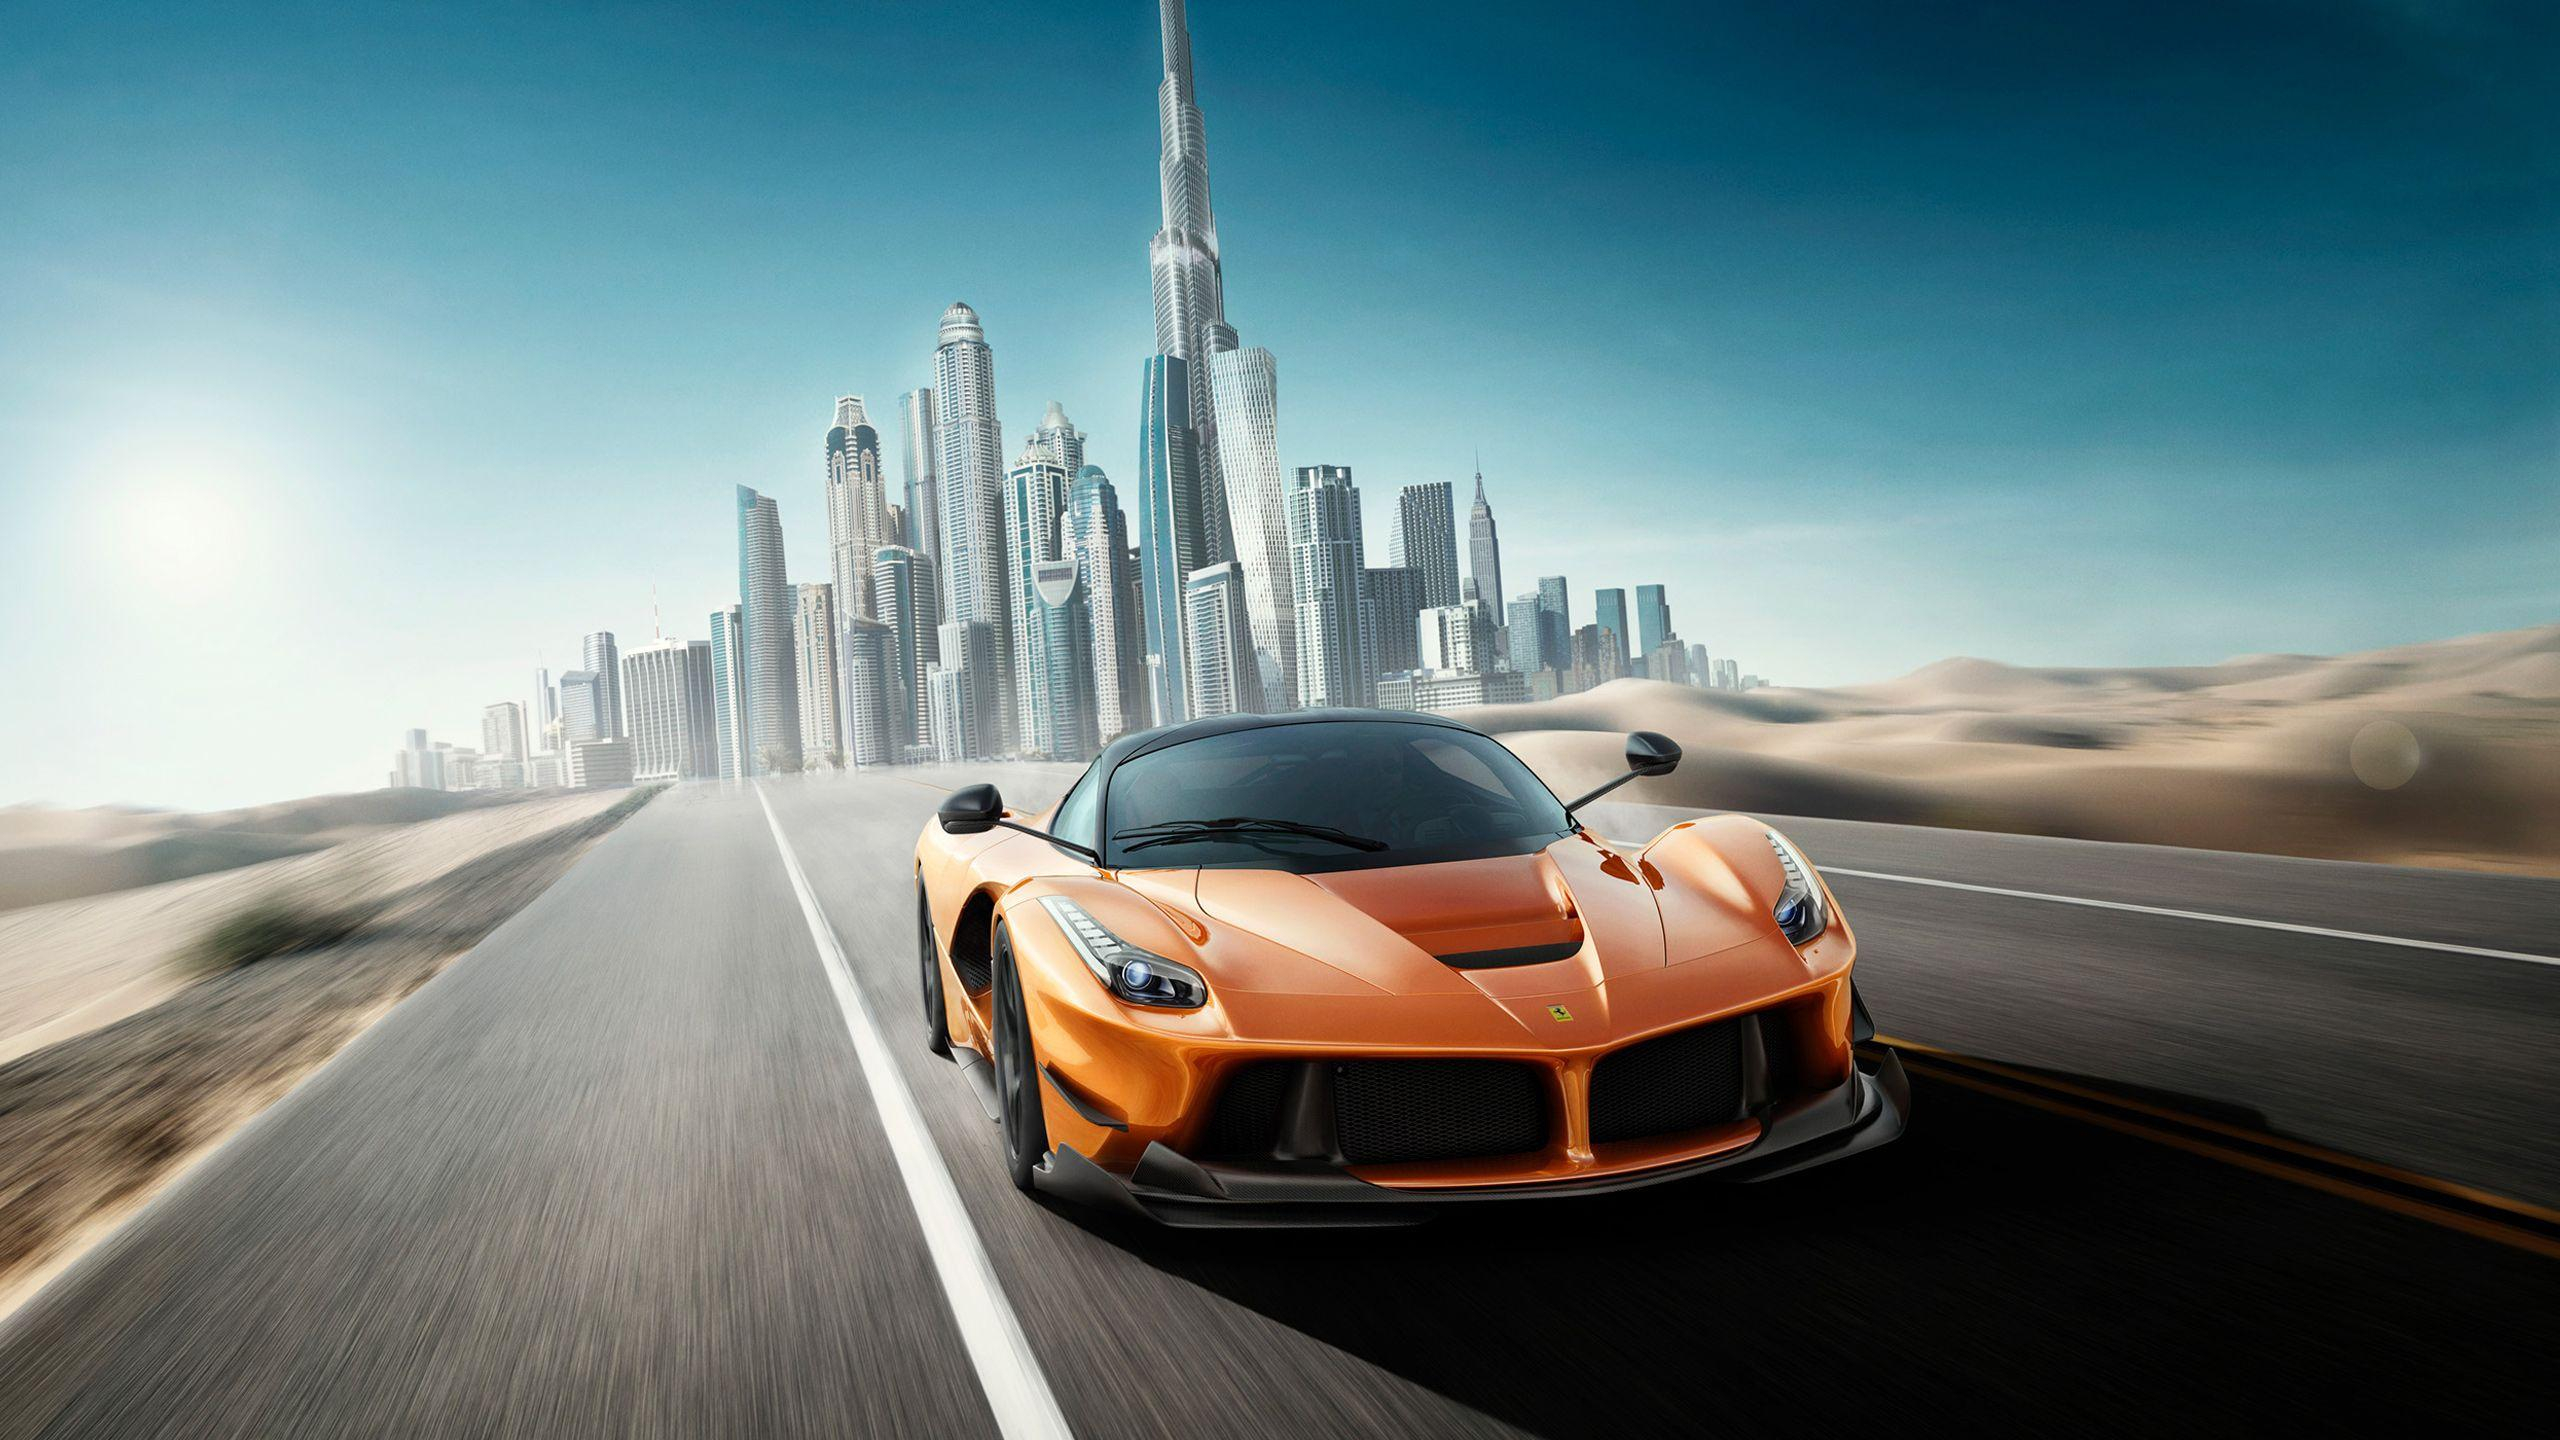 2560x1440 Wallpapers Supercar